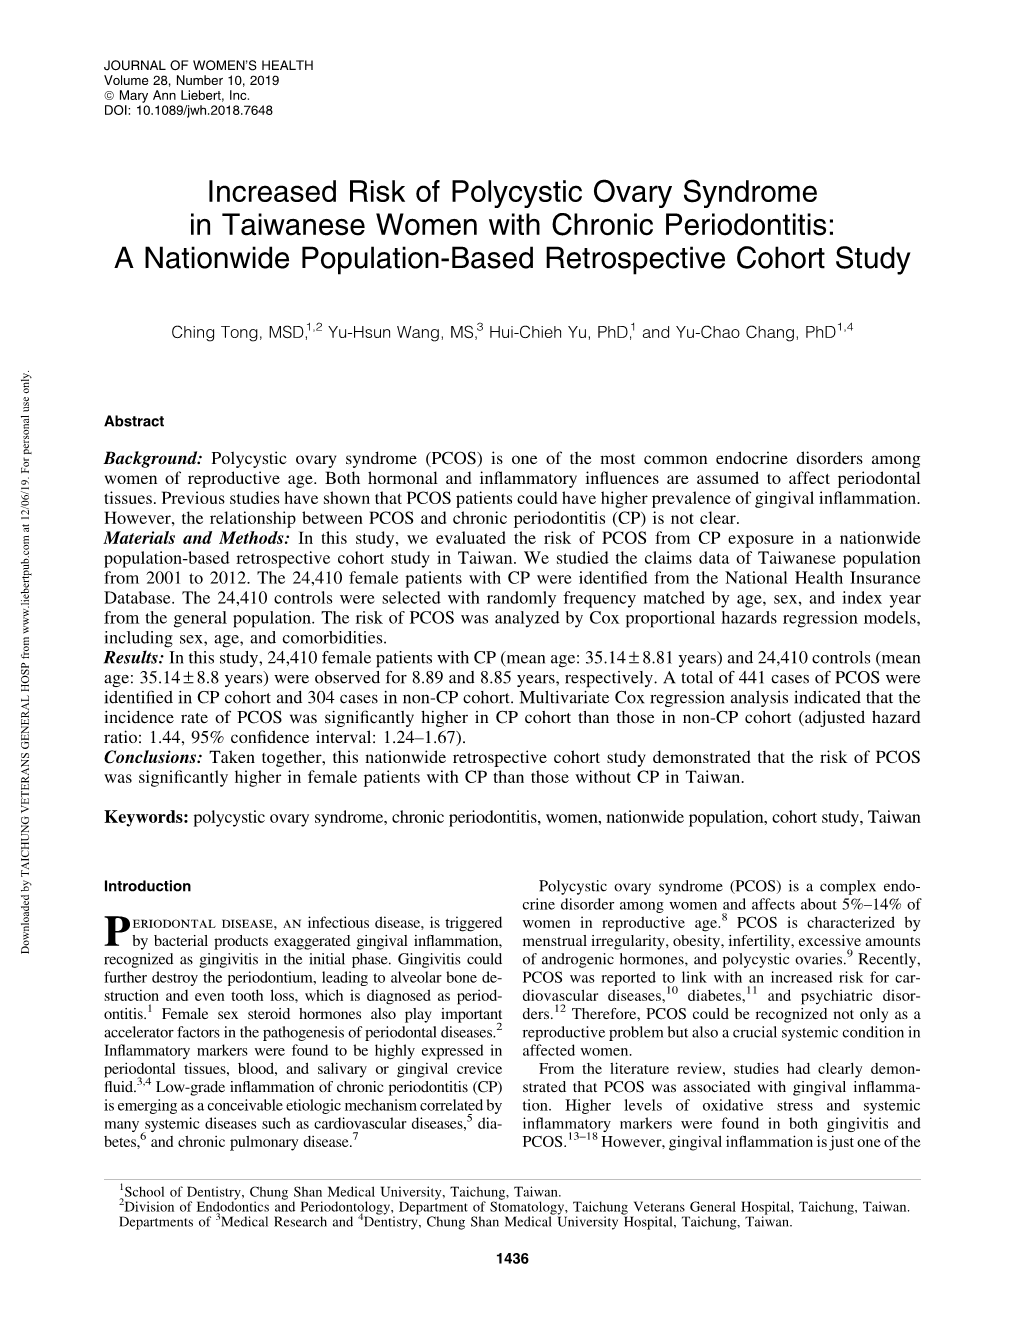 Increased Risk of Polycystic Ovary Syndrome in Taiwanese Women with Chronic Periodontitis: a Nationwide Population-Based Retrospective Cohort Study